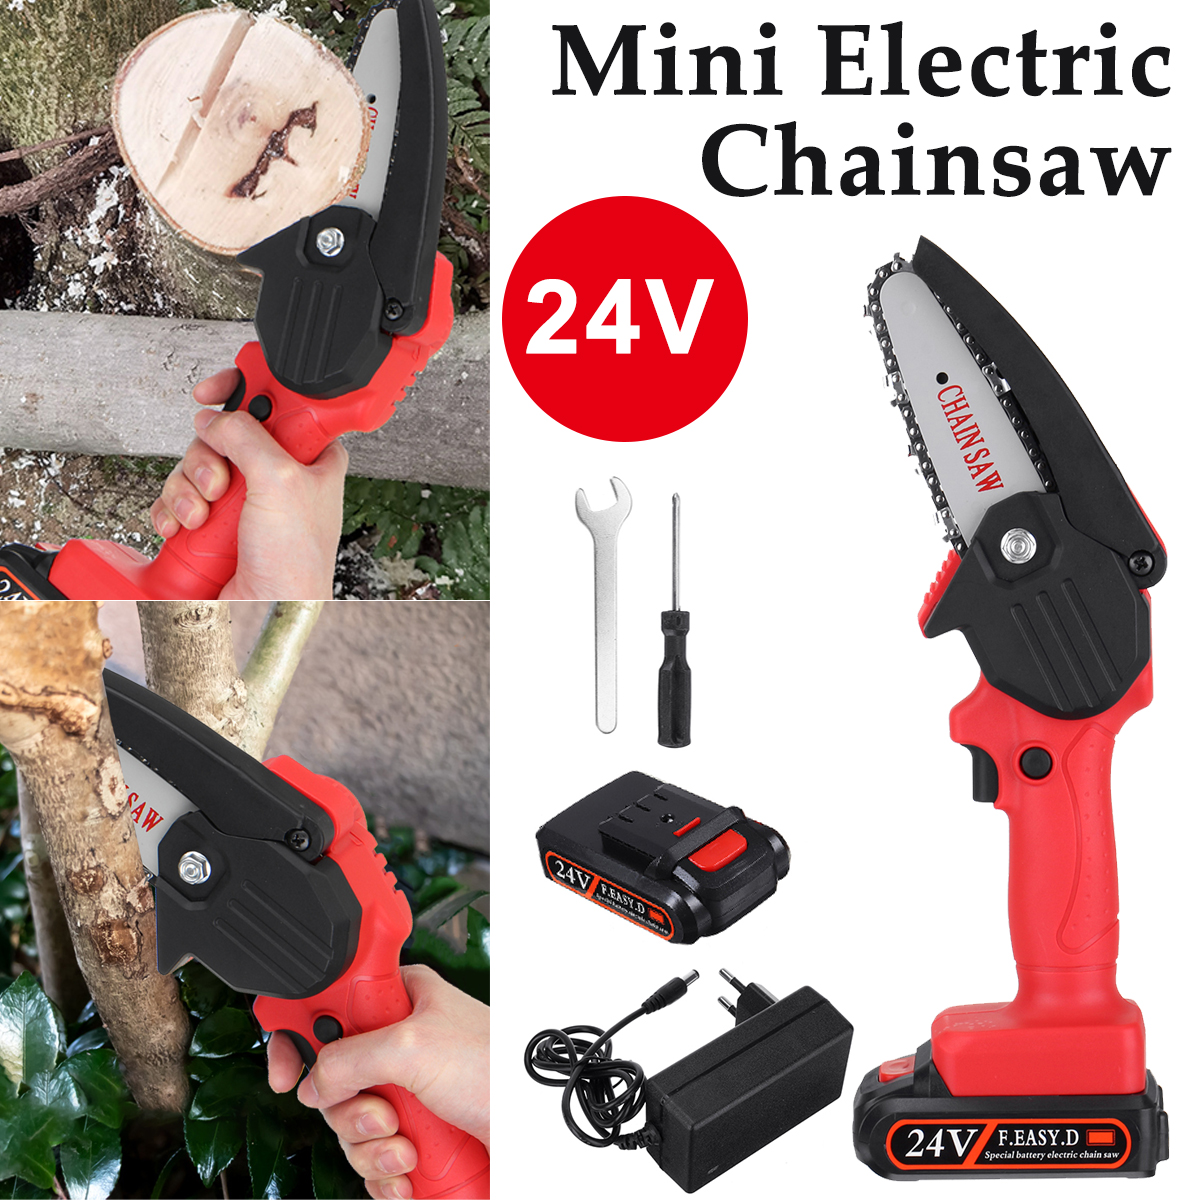 24V-650W-Portable-Wood-Pruning-Saw-4-Inch-Rechargable-Mini-Electric-Chainsaw-Handheld-Wood-Pruning-S-1823668-1